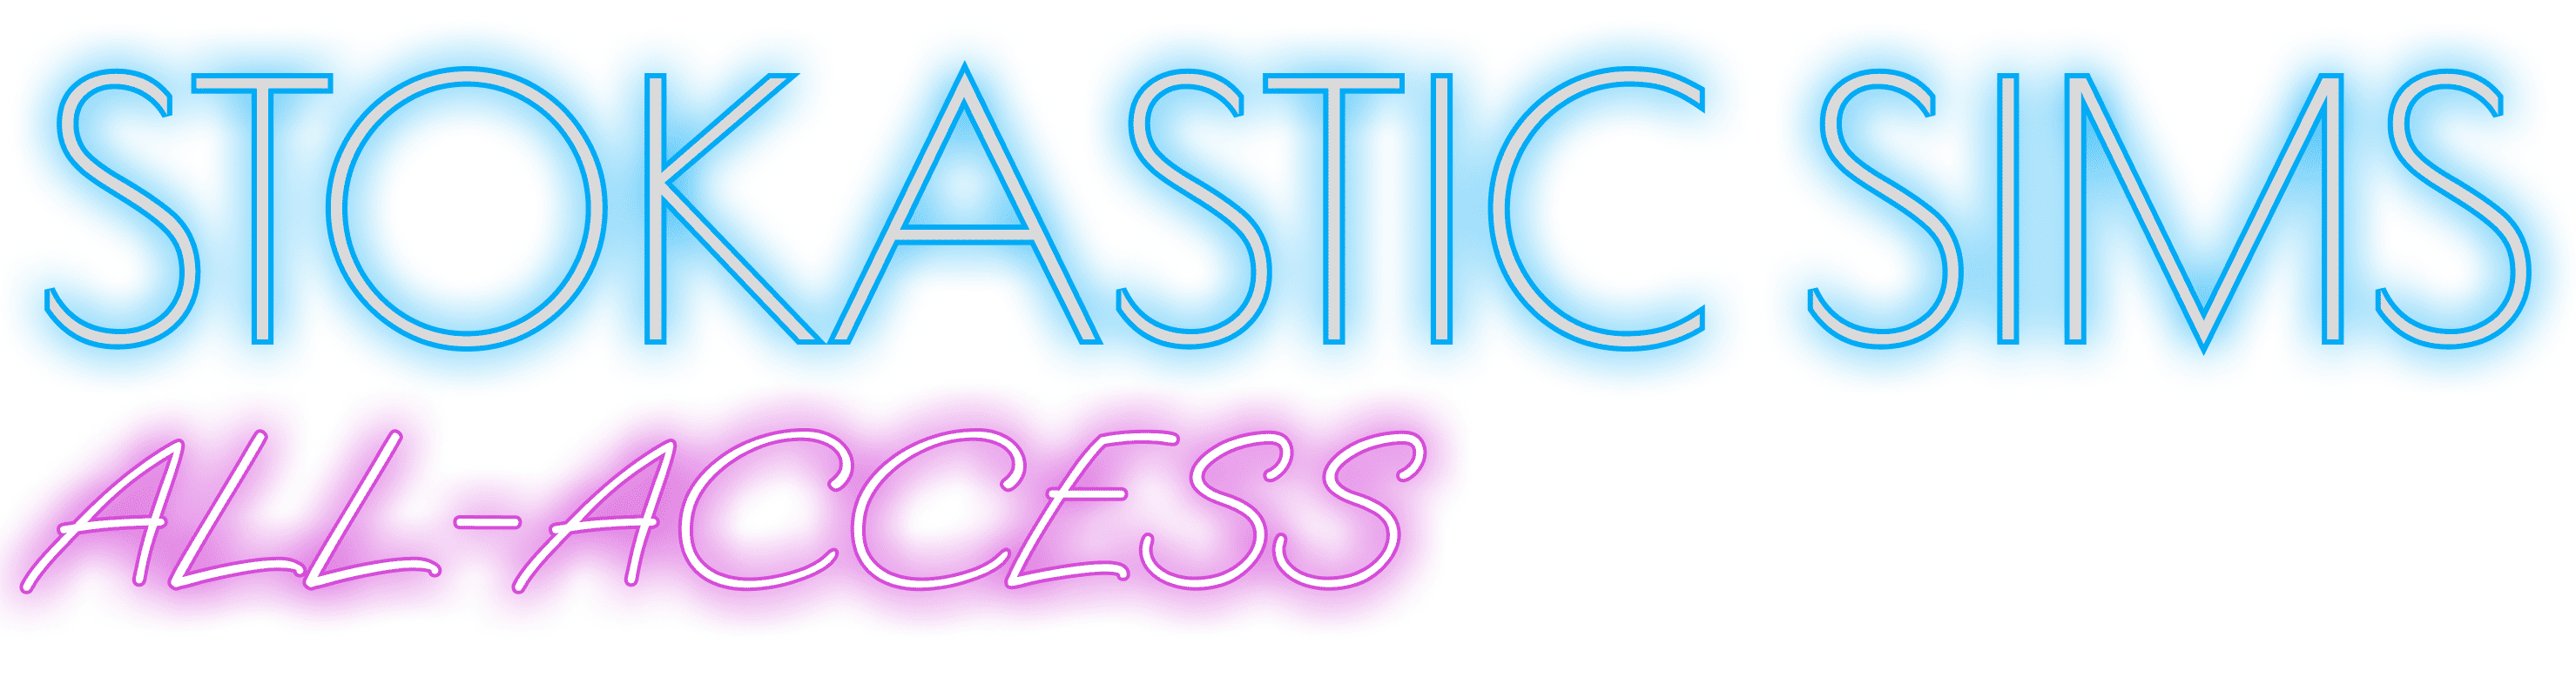 Stokastic DFS Sims All Access